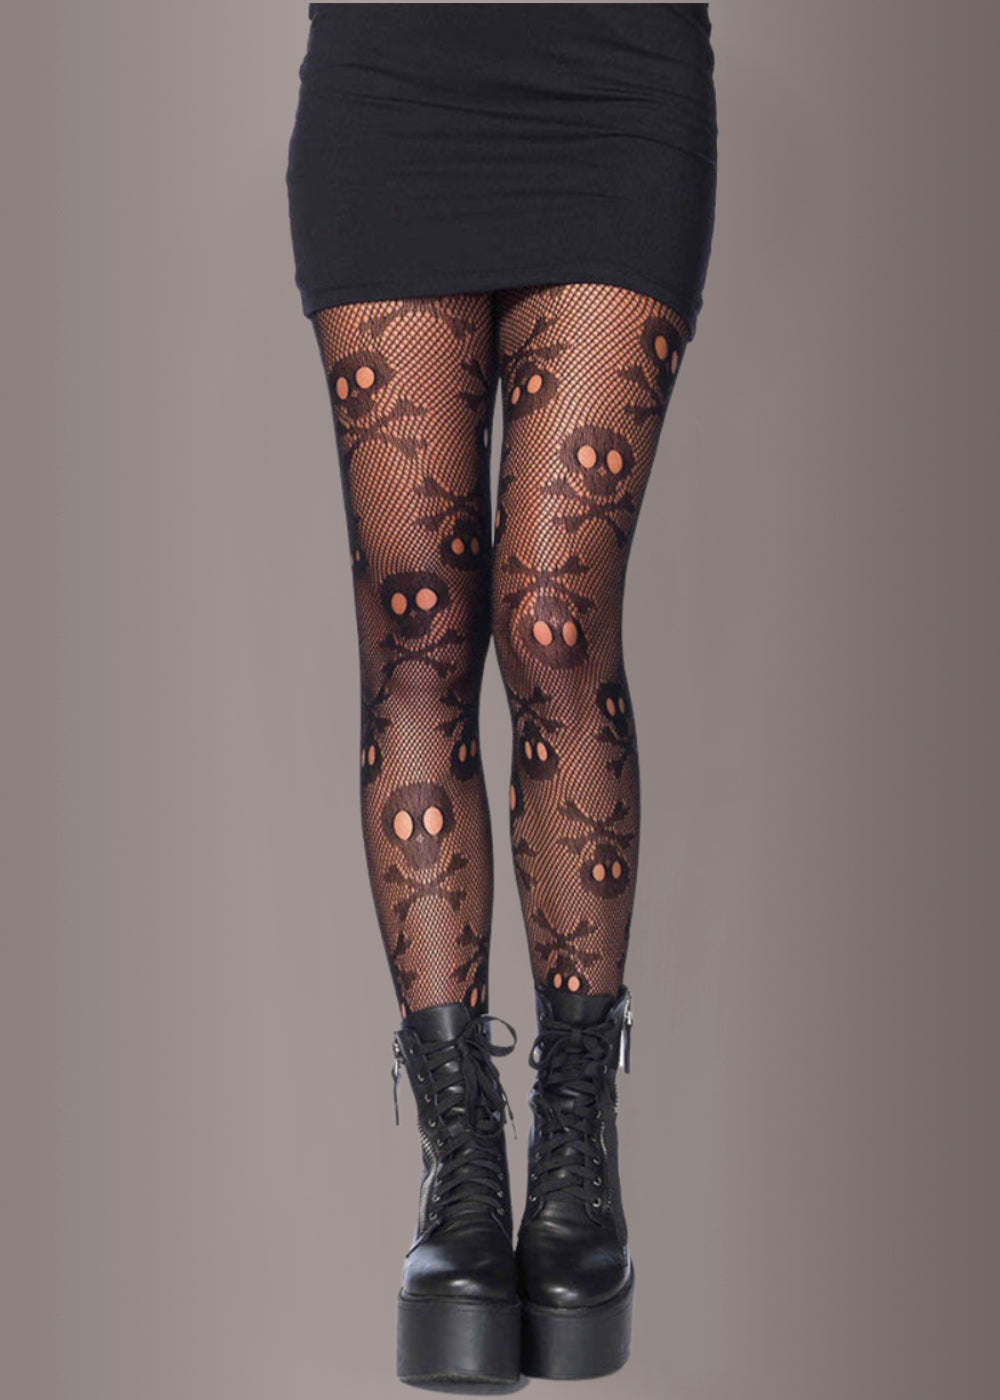 Black Gothic Fishnet Stockings Punk Tights Mesh Skull Print Designer Pirate  Halloween Fancy Party Club Sexy Tights Pantyhose